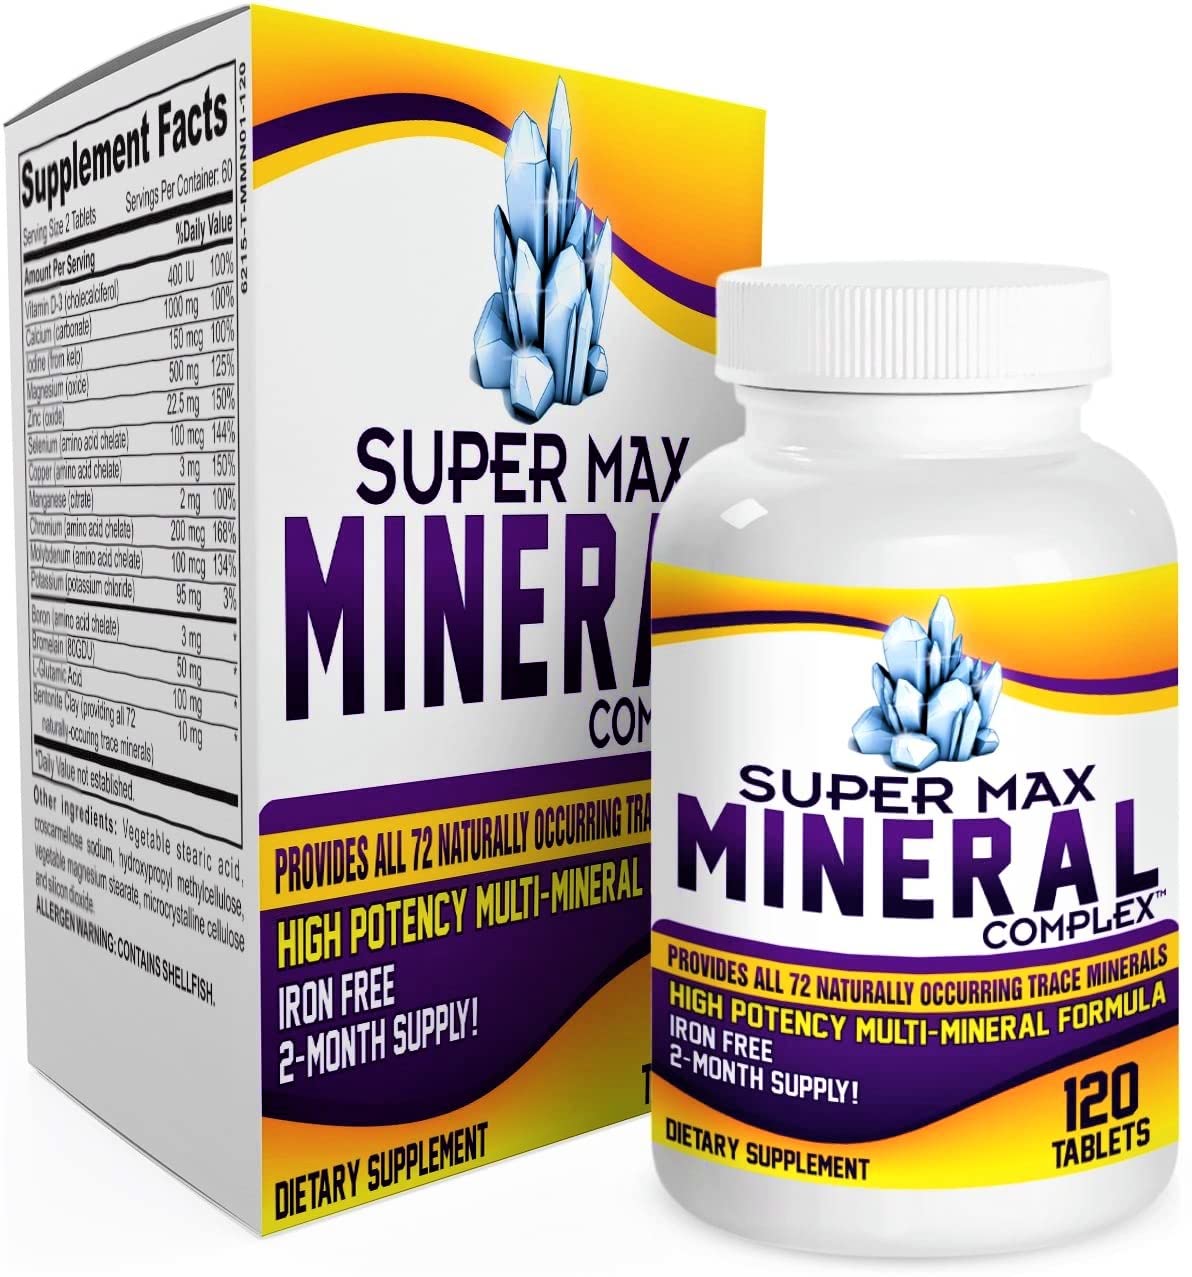 2-Month Multimineral Supplement (Iron Free) with 72 Trace Minerals - Natural Multiminerals - High Potency Multi Mineral Supplements All-in-1 Formula - 120 Tablets